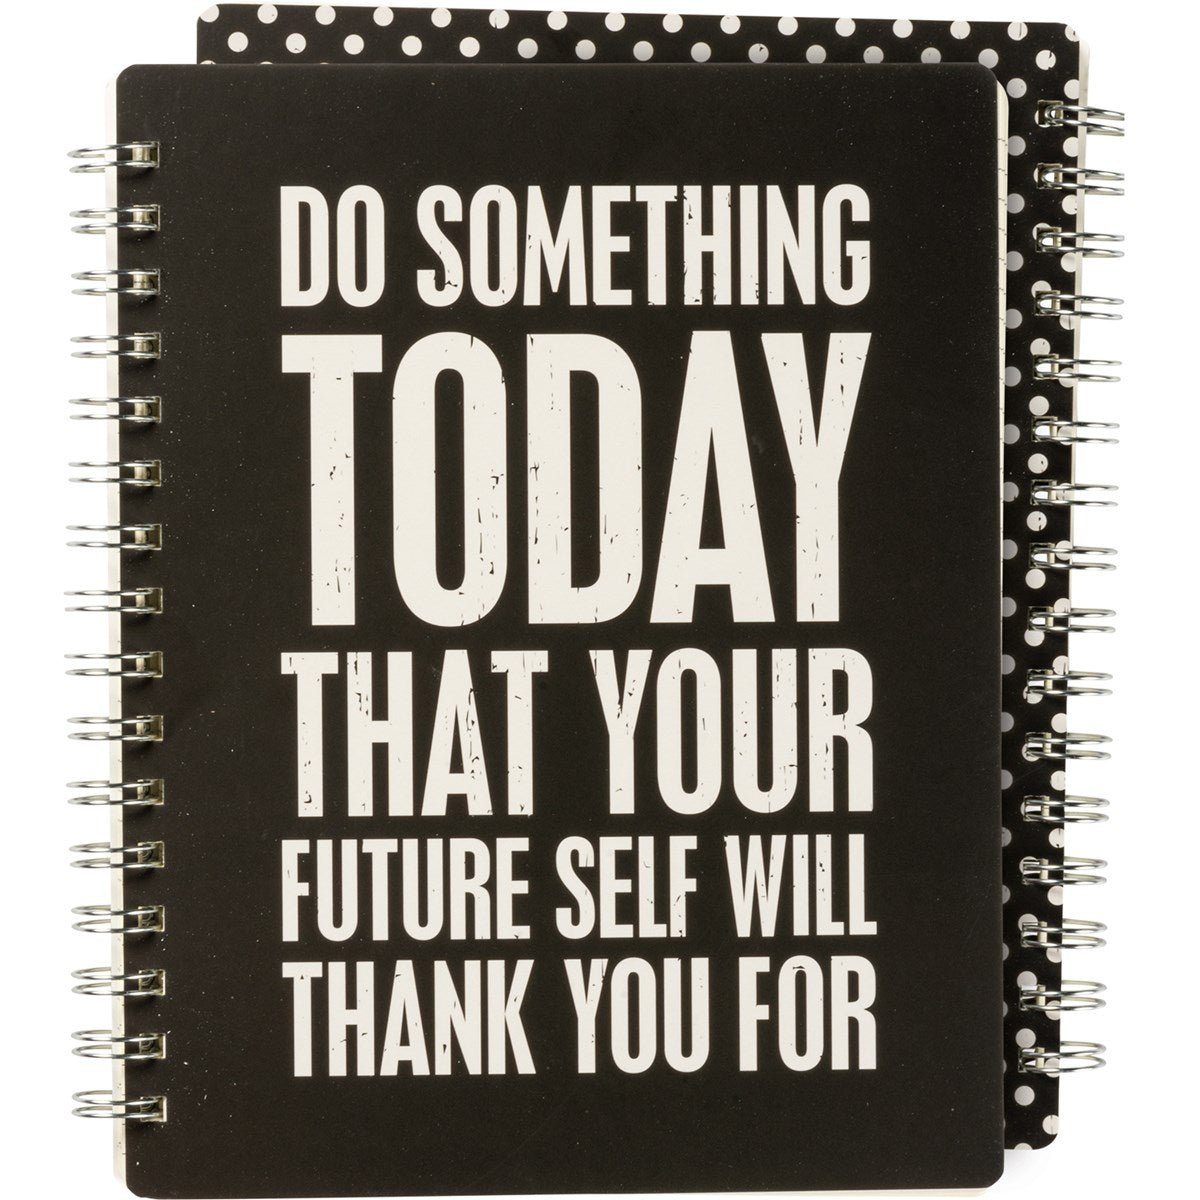 Do Something Today That Your Future Self Will Thank You For Spiral Notebook | Dot Print on Back Cover | 9" x 7" | 120 Lined Pages